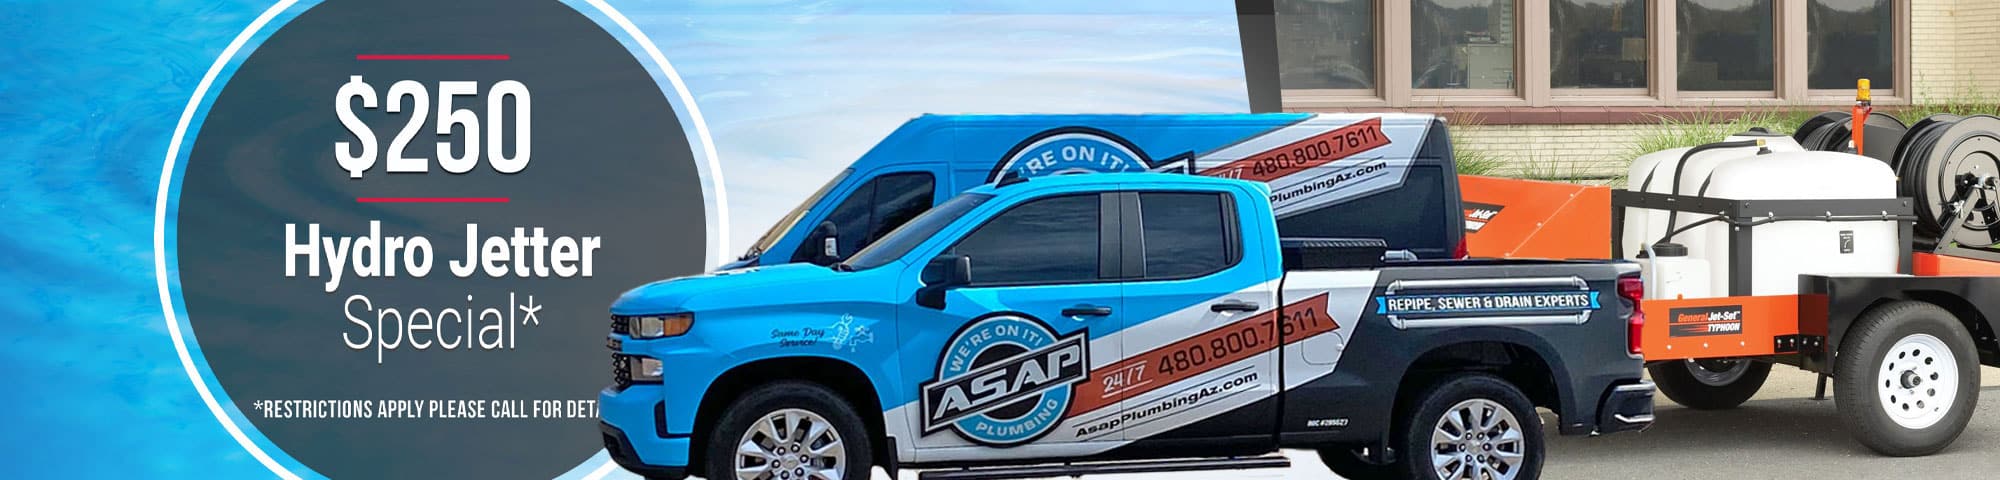 Hydrojetting Services By ASAP Plumbing Arizona